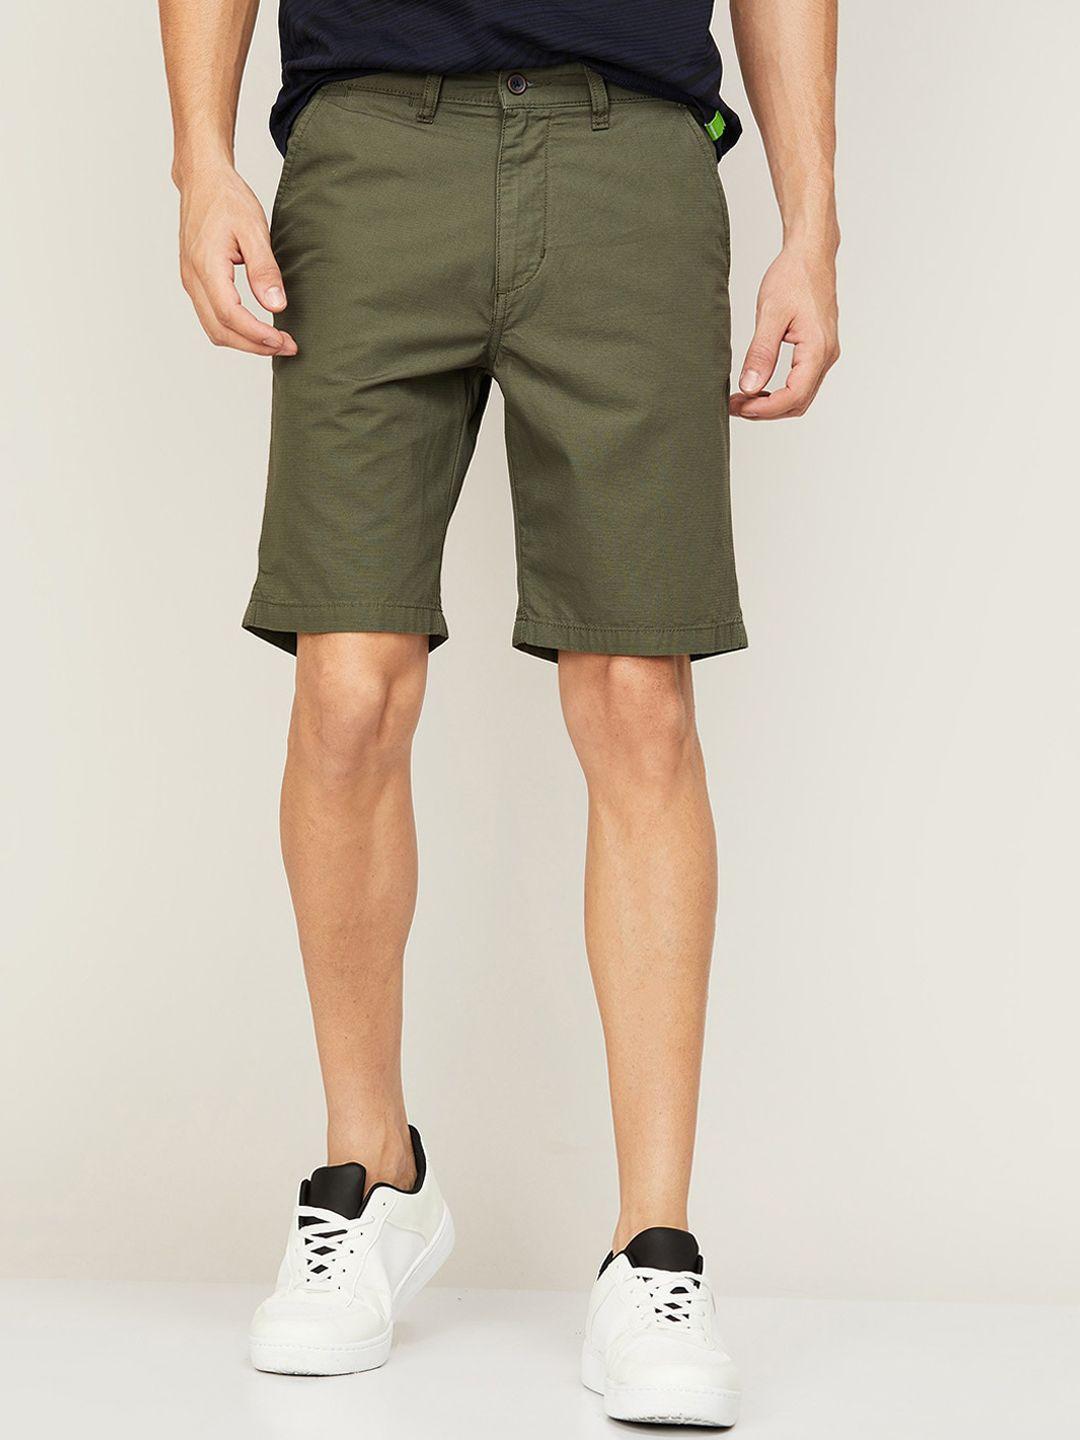 code by lifestyle men olive green solid cotton chino shorts